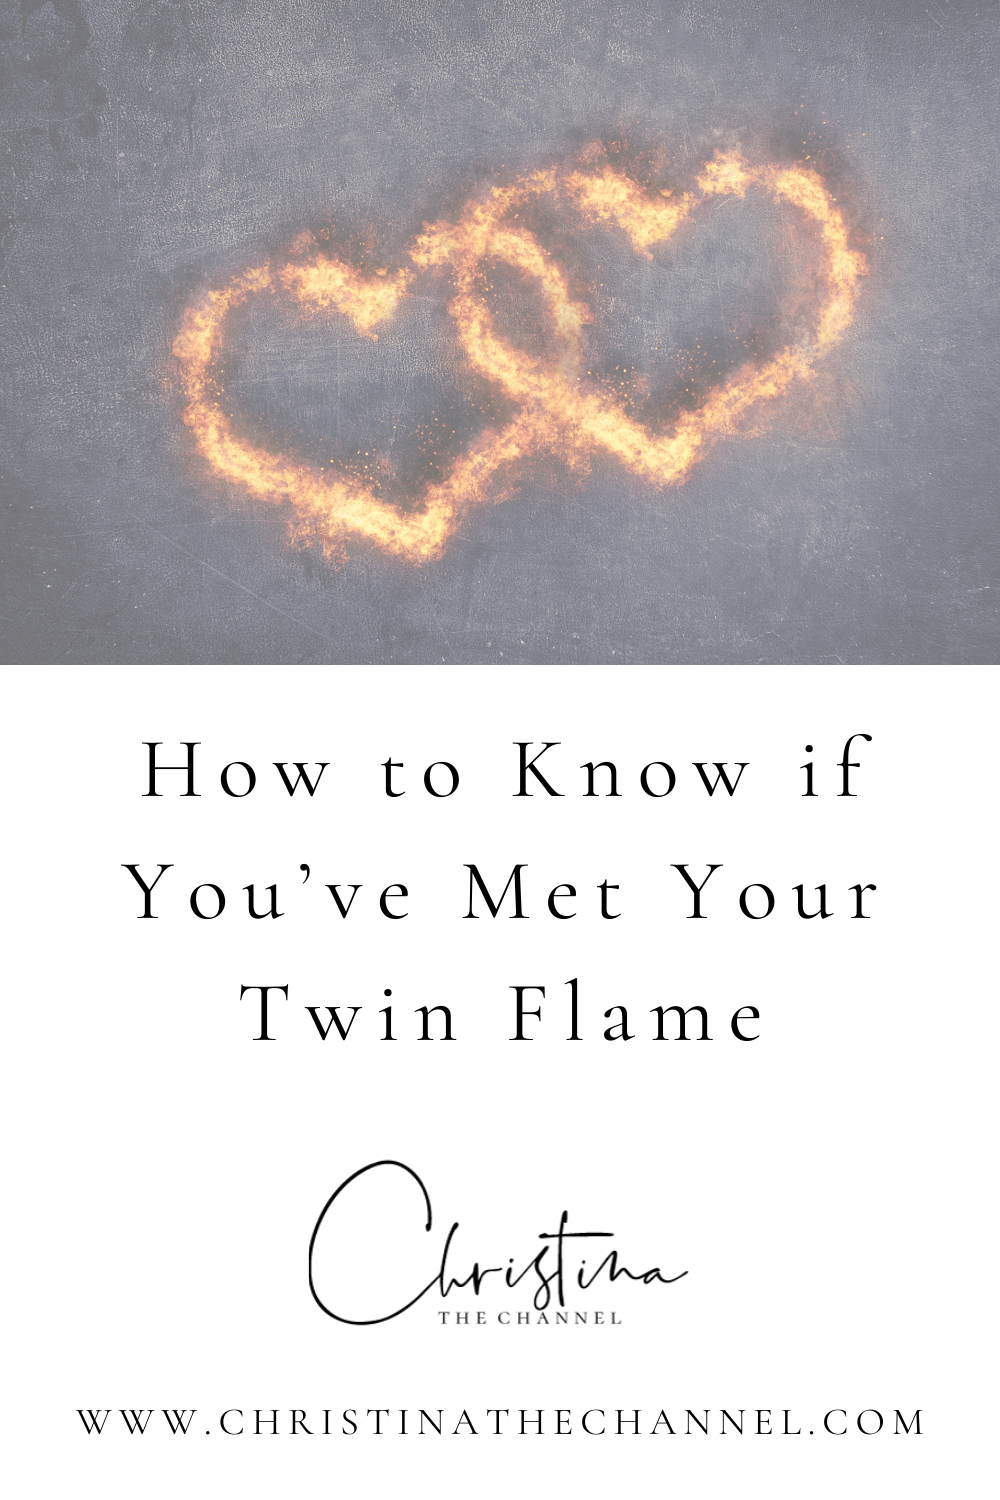 How to Know If You’ve Met Your Twin Flame